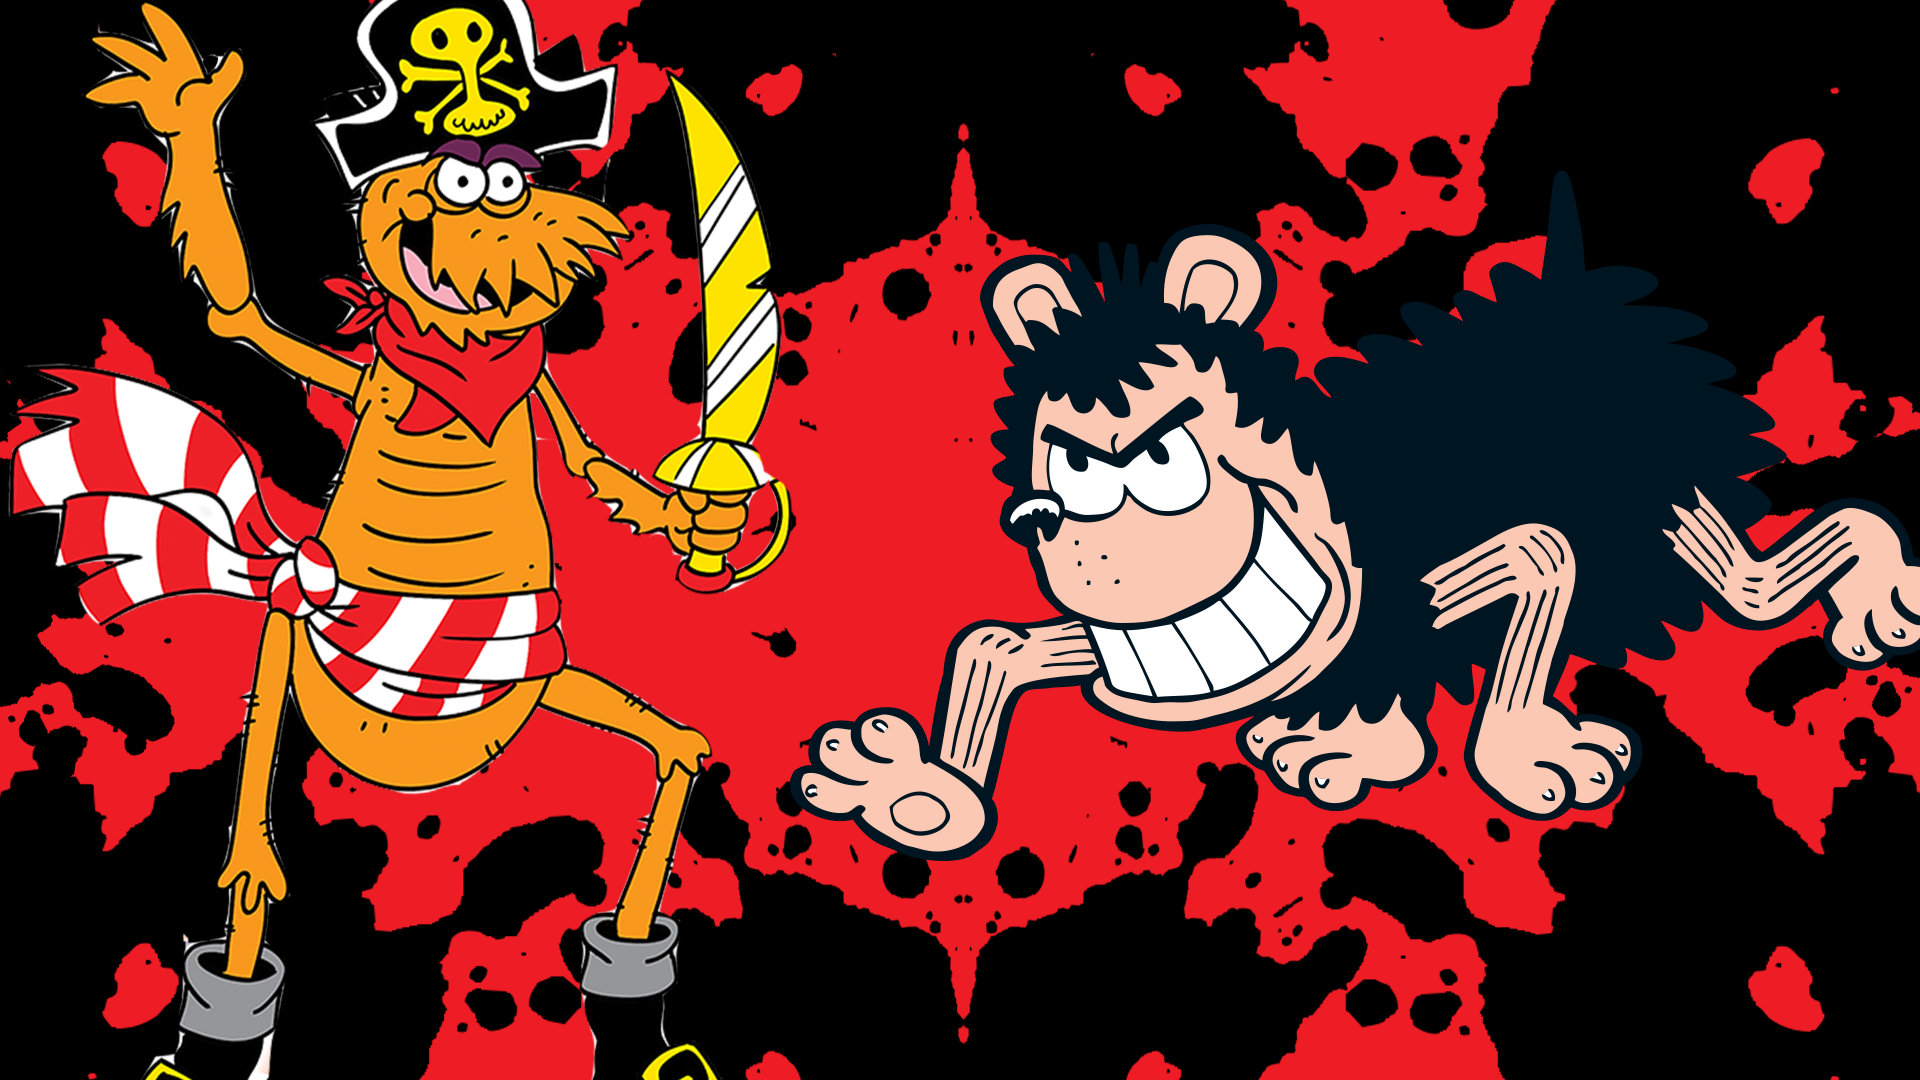 Gnasher and flea on red and black background